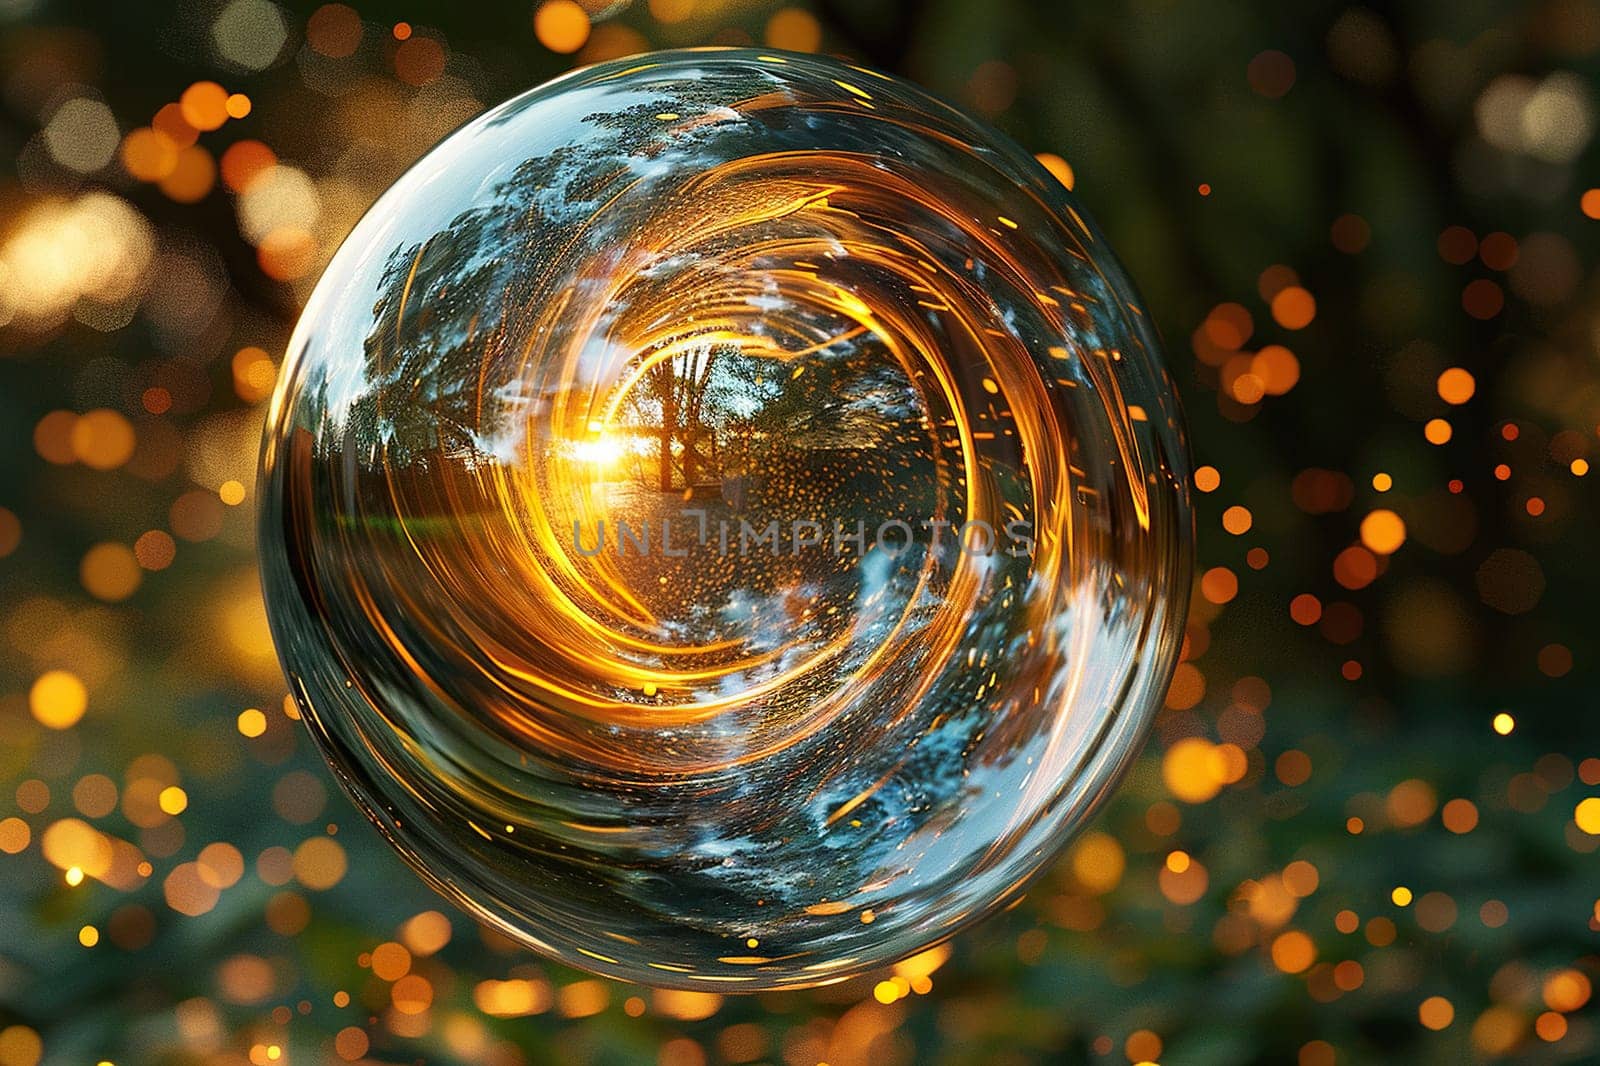 Transparent glass sphere with nature reflection against golden bokeh background. Environment concept. Generated by artificial intelligence by Vovmar